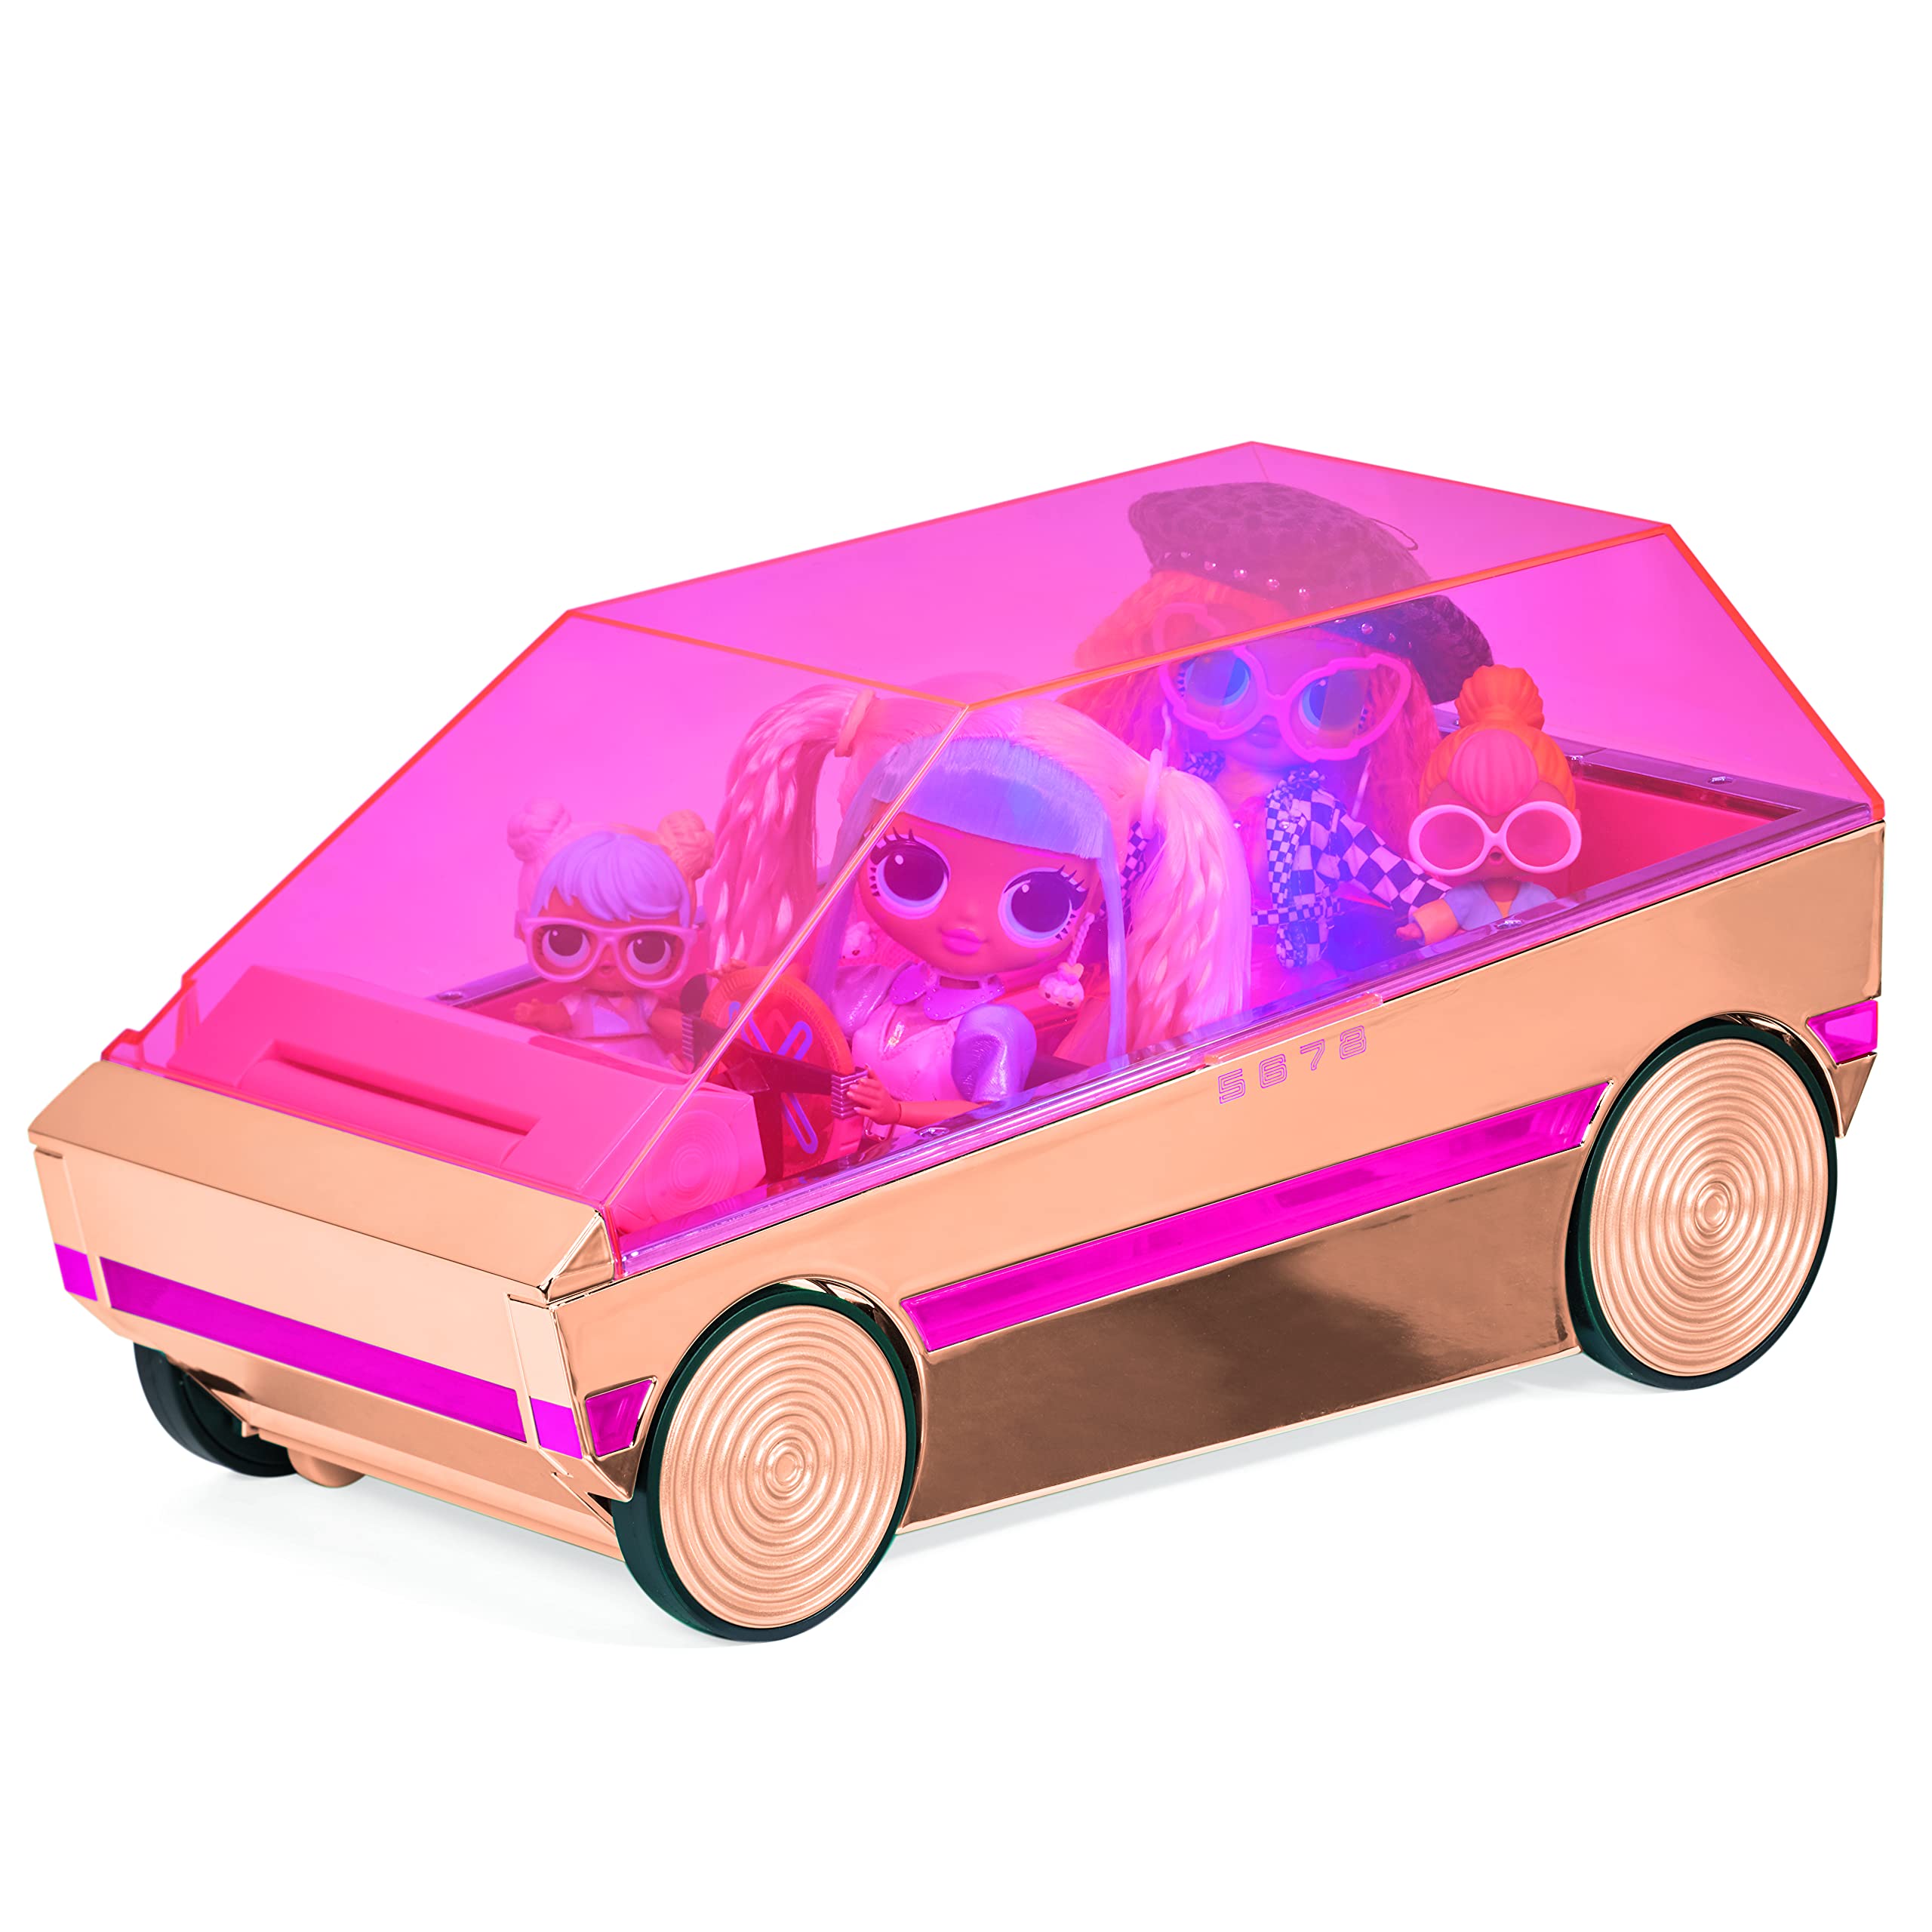 LOL Surprise 3-in-1 Party Cruiser Car w/ Pool, Dance Floor and Magic Black Lights $19.93 + Free Shipping w/ Prime or on $35+